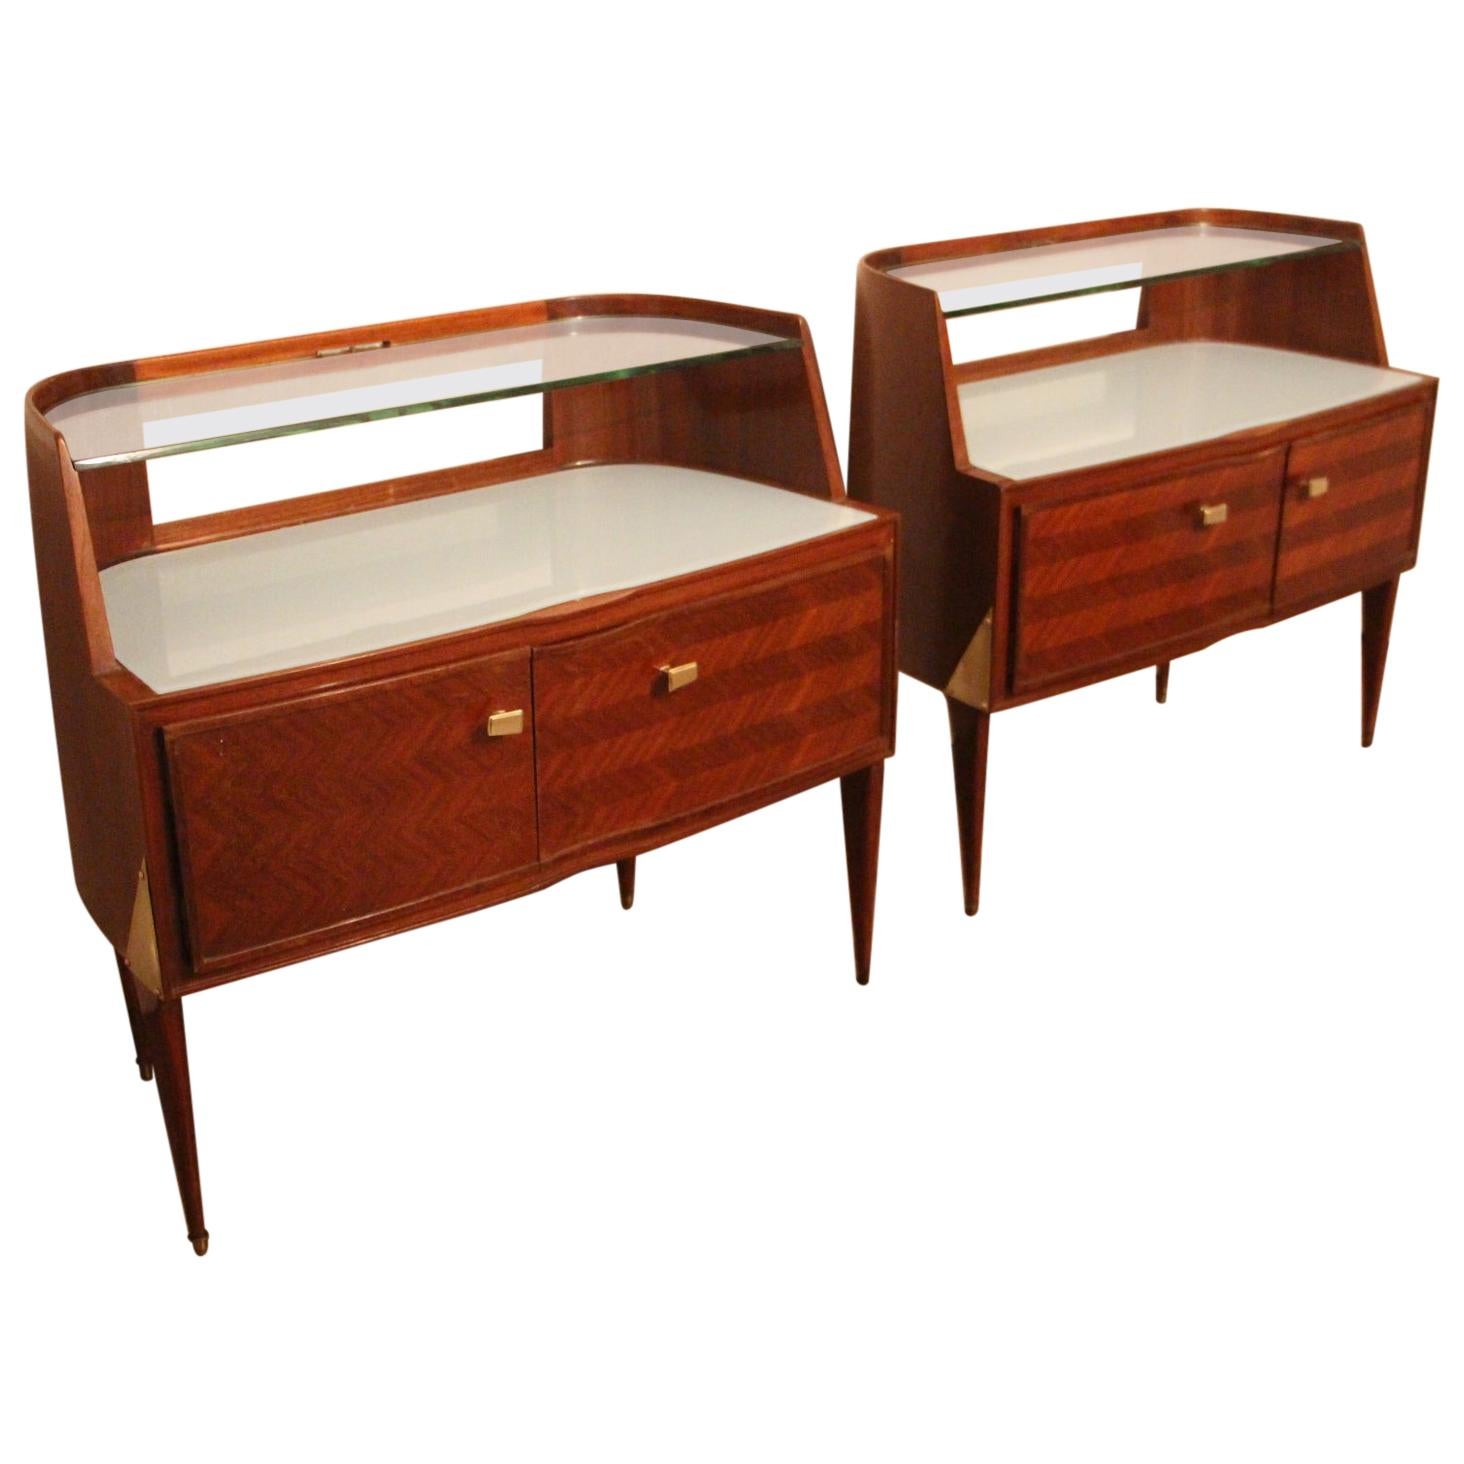 Pair of Mid-Century Modern Nightstands, Bed Side Tables by Paolo Buffa